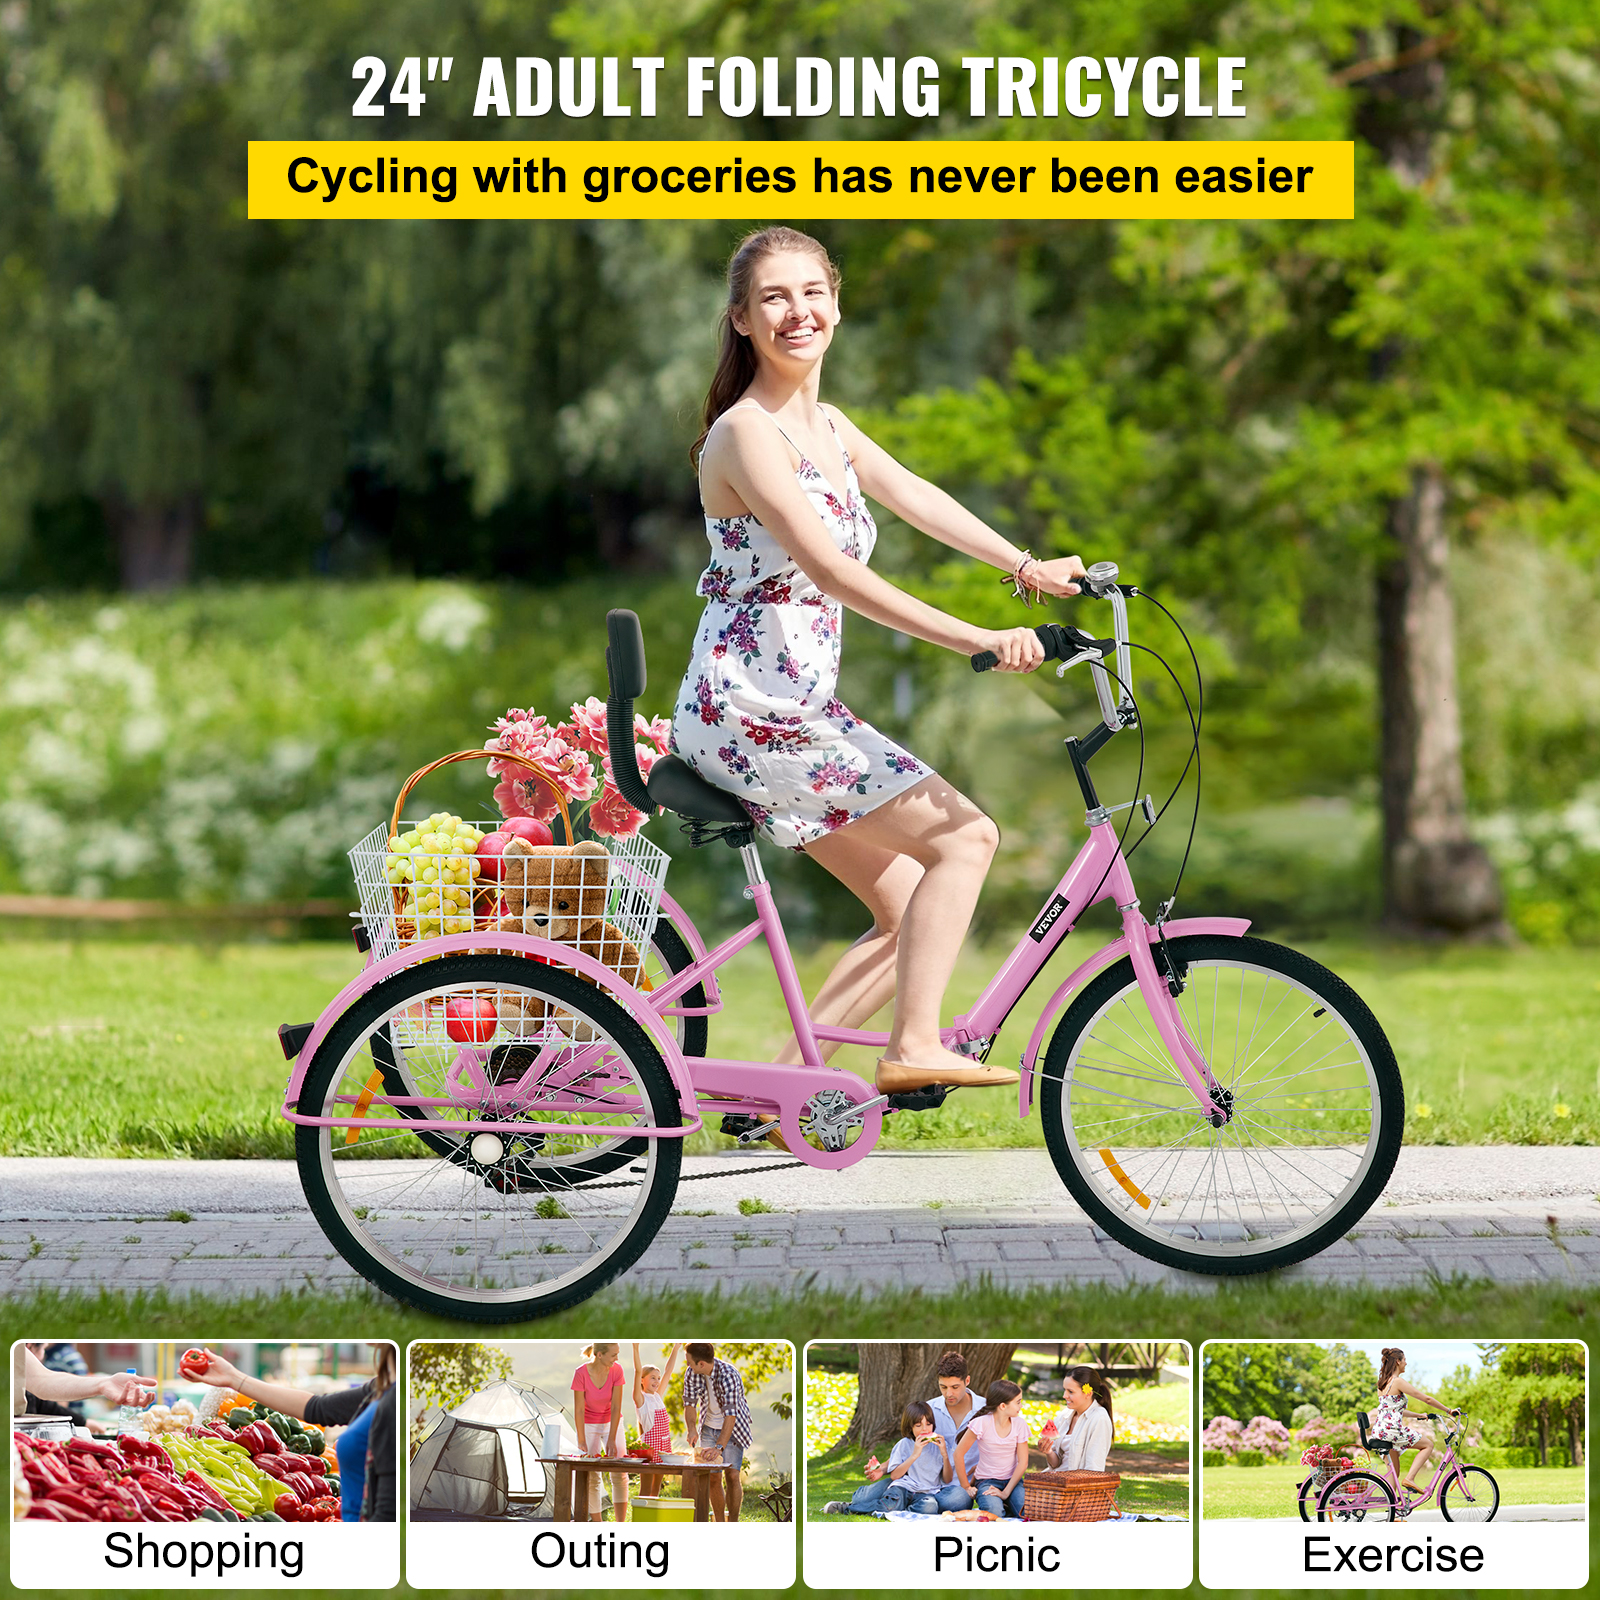 VEVOR Foldable Adult Tricycle 24 Wheels,7-Speed Trike, 3 Wheels Colorful Bike with Basket, Portable and Foldable Bicycle for Adults Exercise Shopping Picnic Outdoor Activities,Pink - image 2 of 9